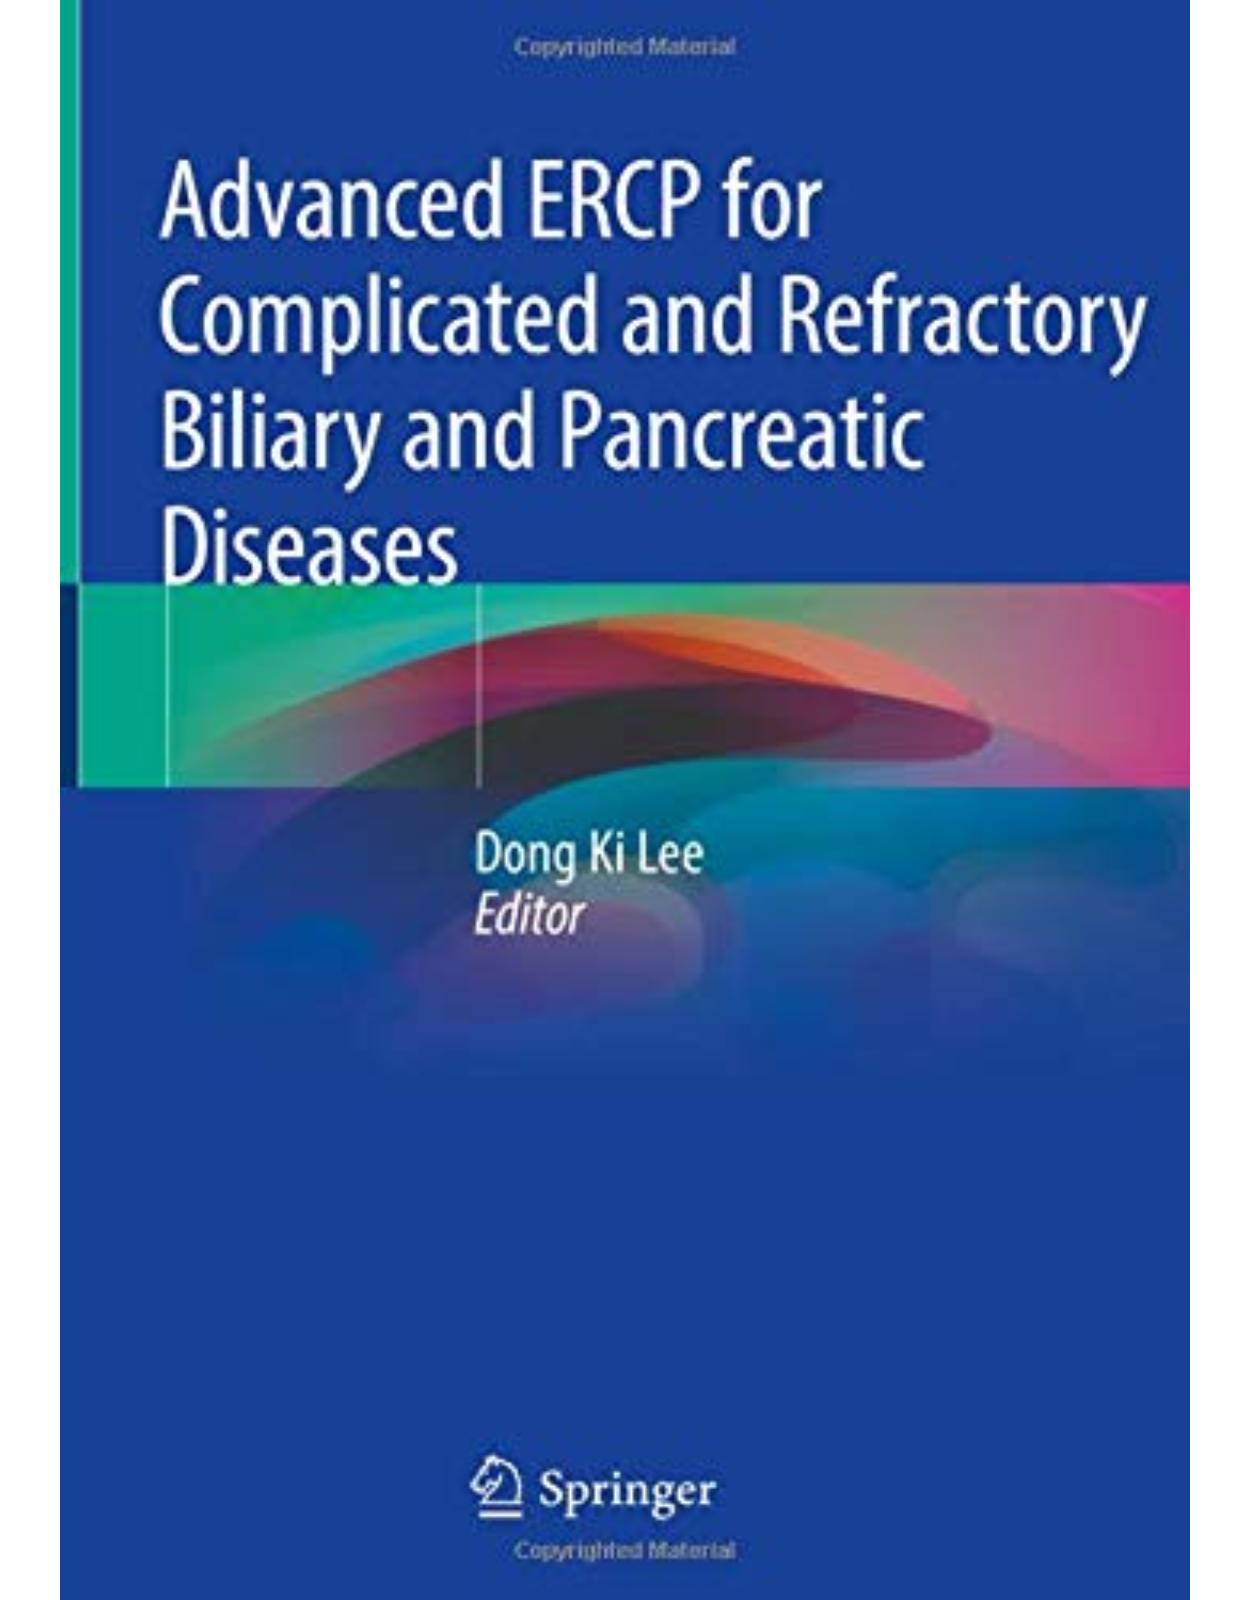 Advanced ERCP for Complicated and Refractory Biliary and Pancreatic Diseases